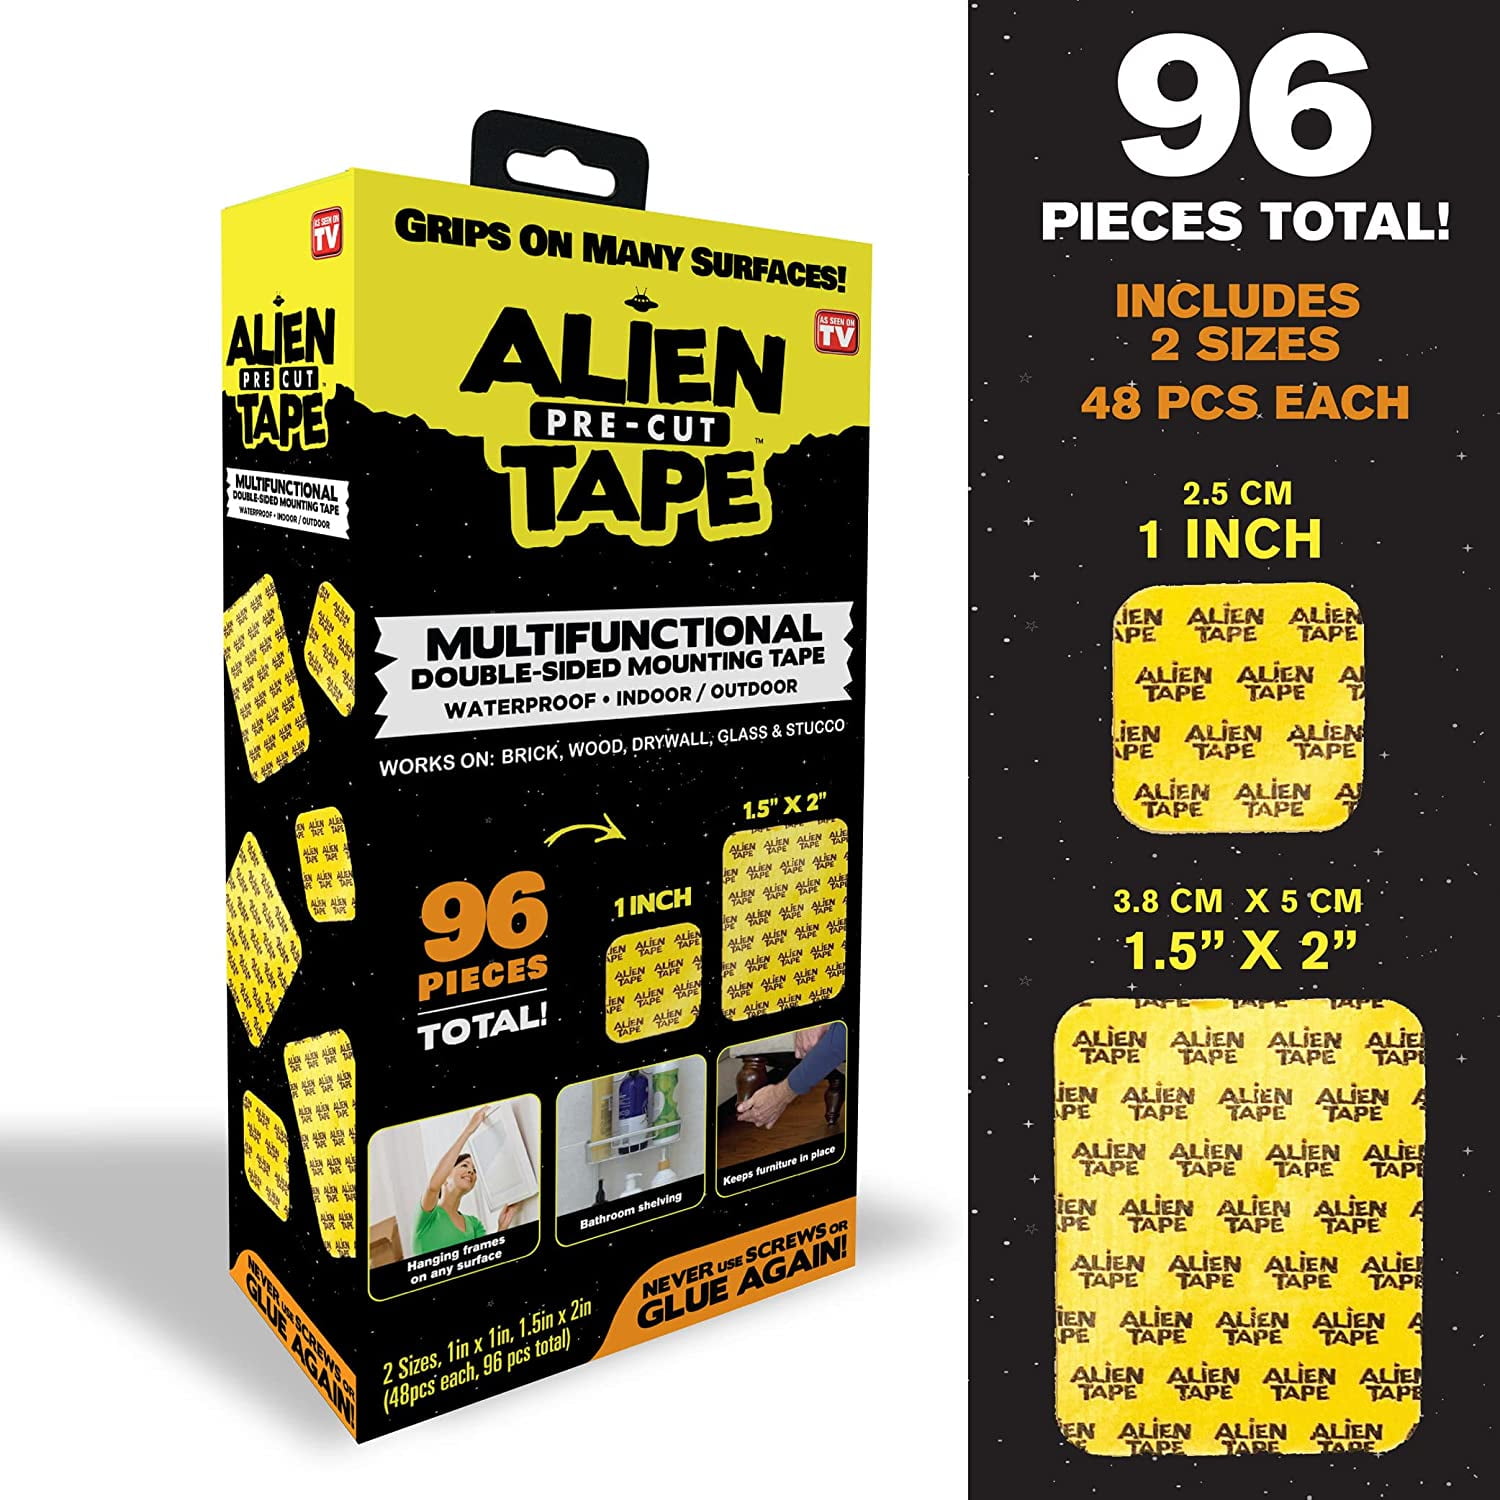 ALIEN TAPE 7087 Multifunctional Reusable Clear Double-Sided Tape, 3 Rolls  at Sutherlands